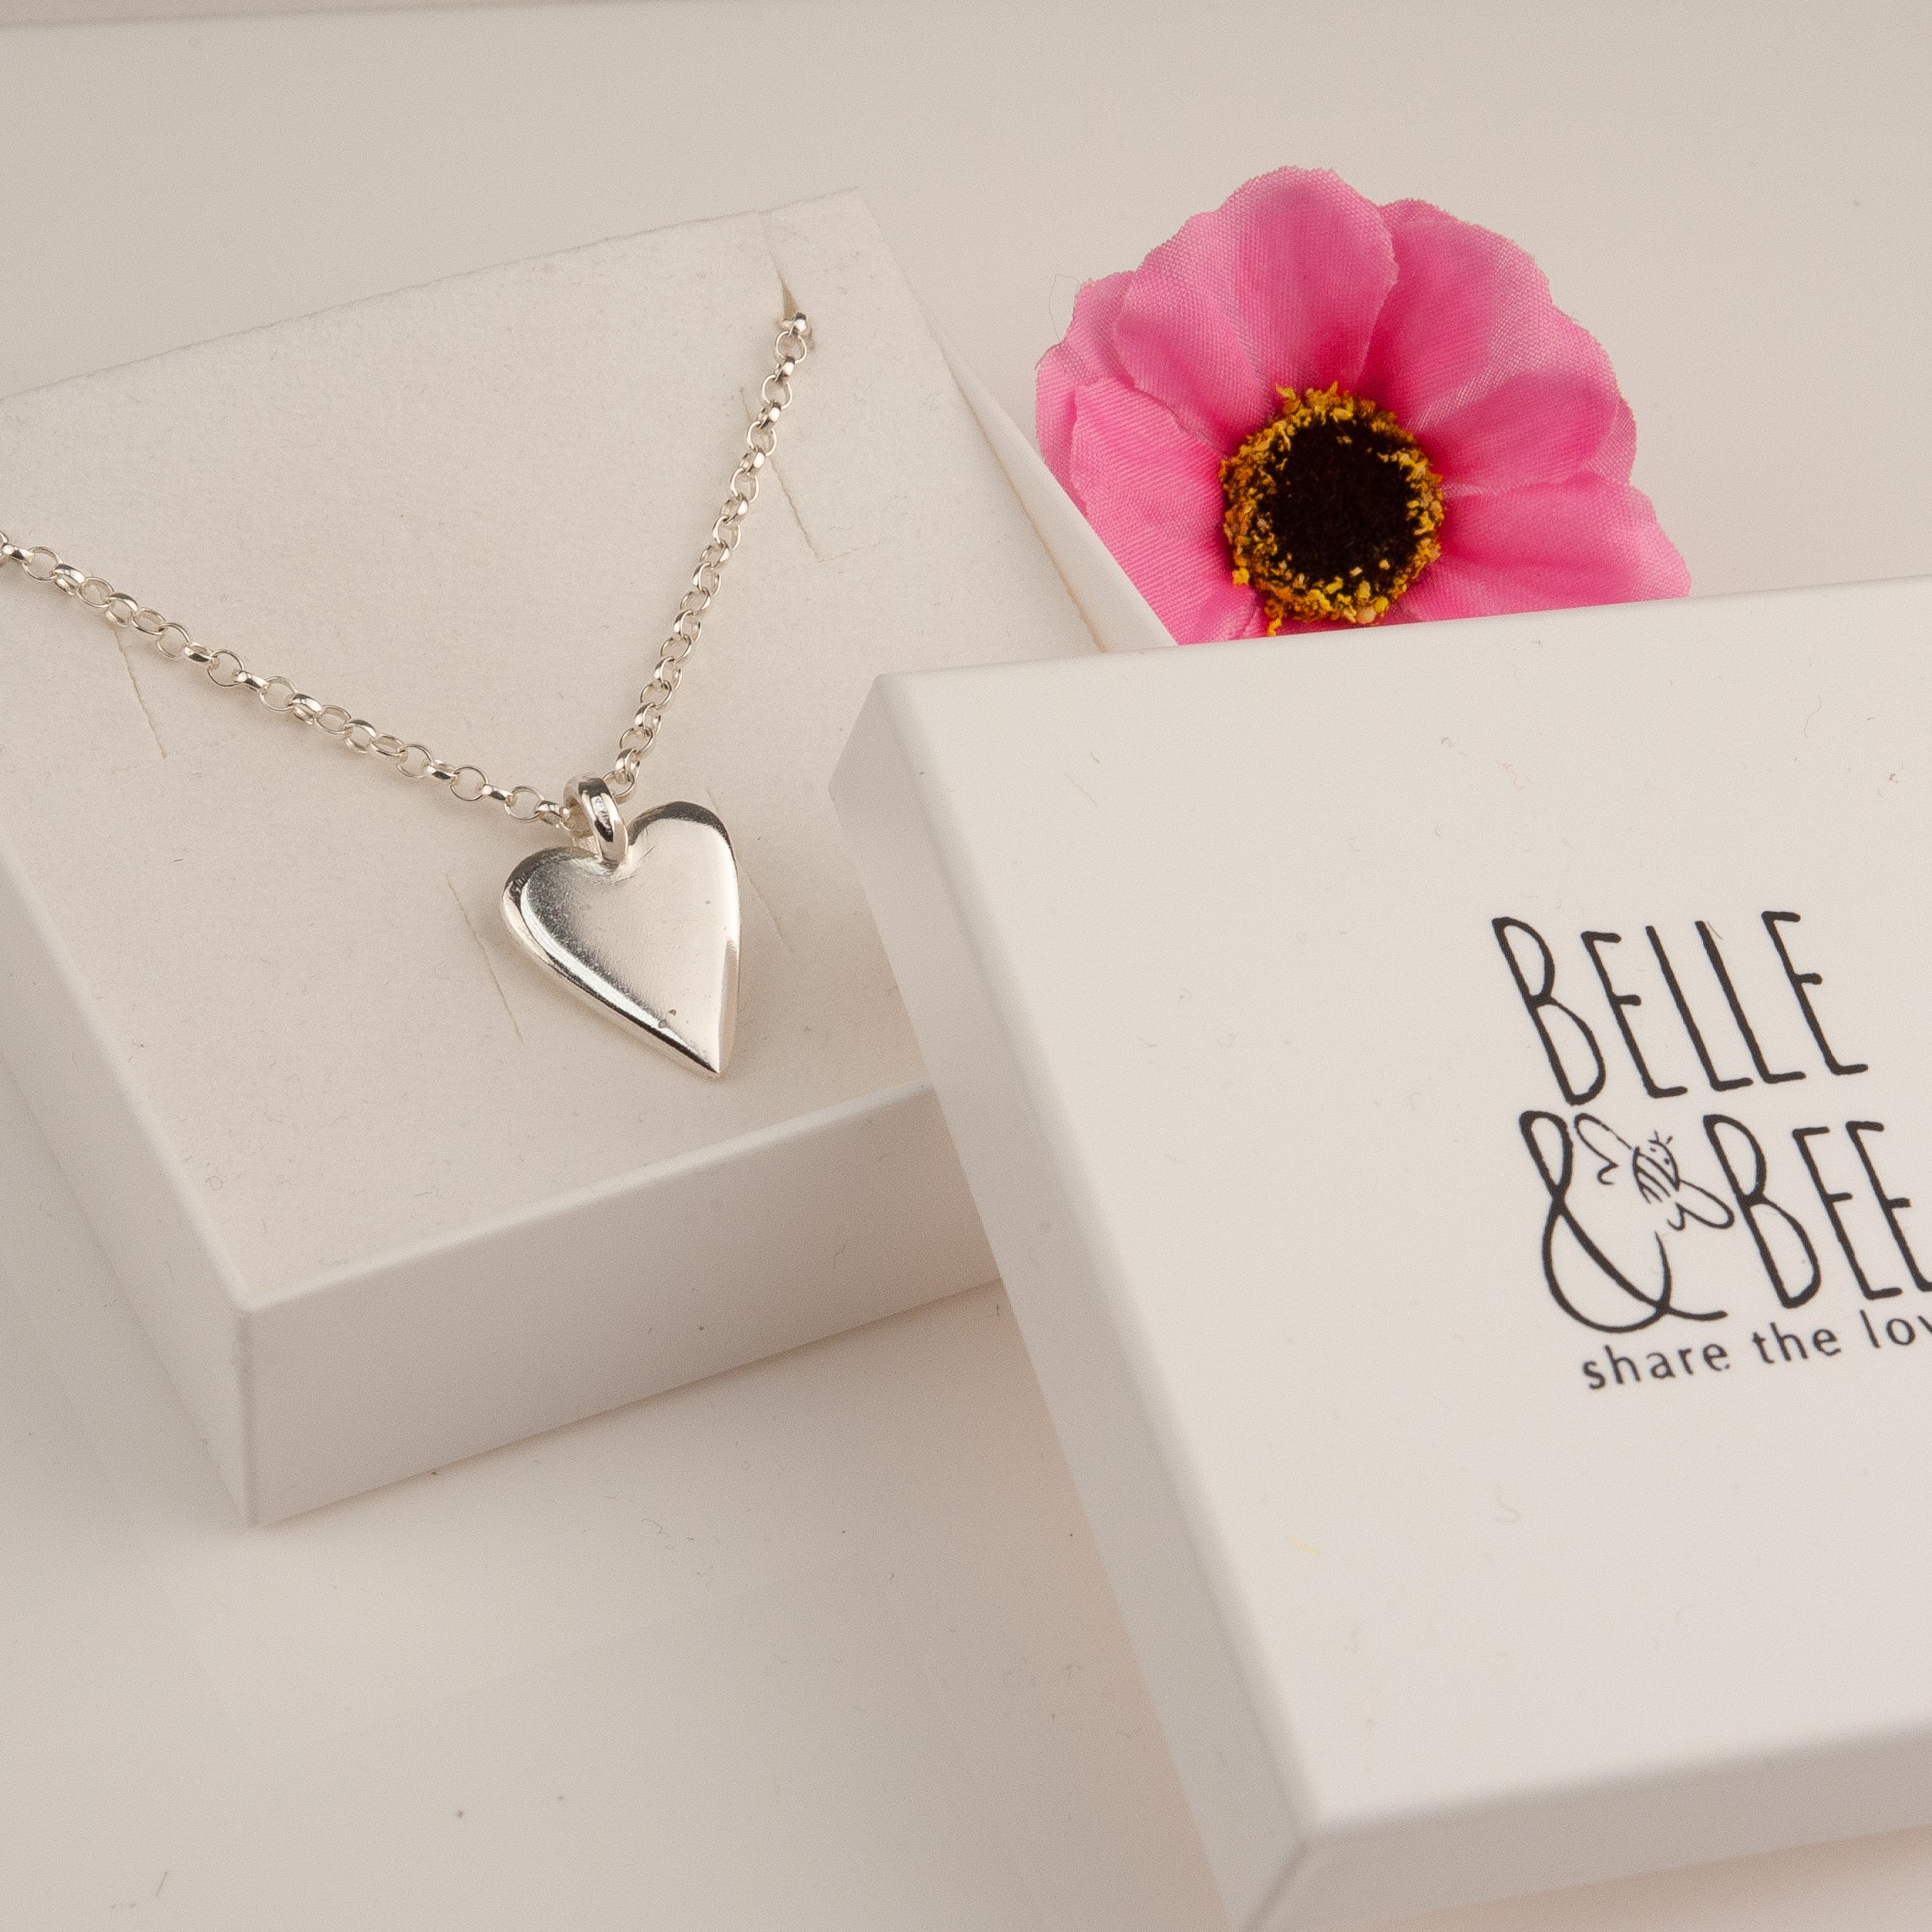 Belle & Bee Belcher necklace with Midi heart charm